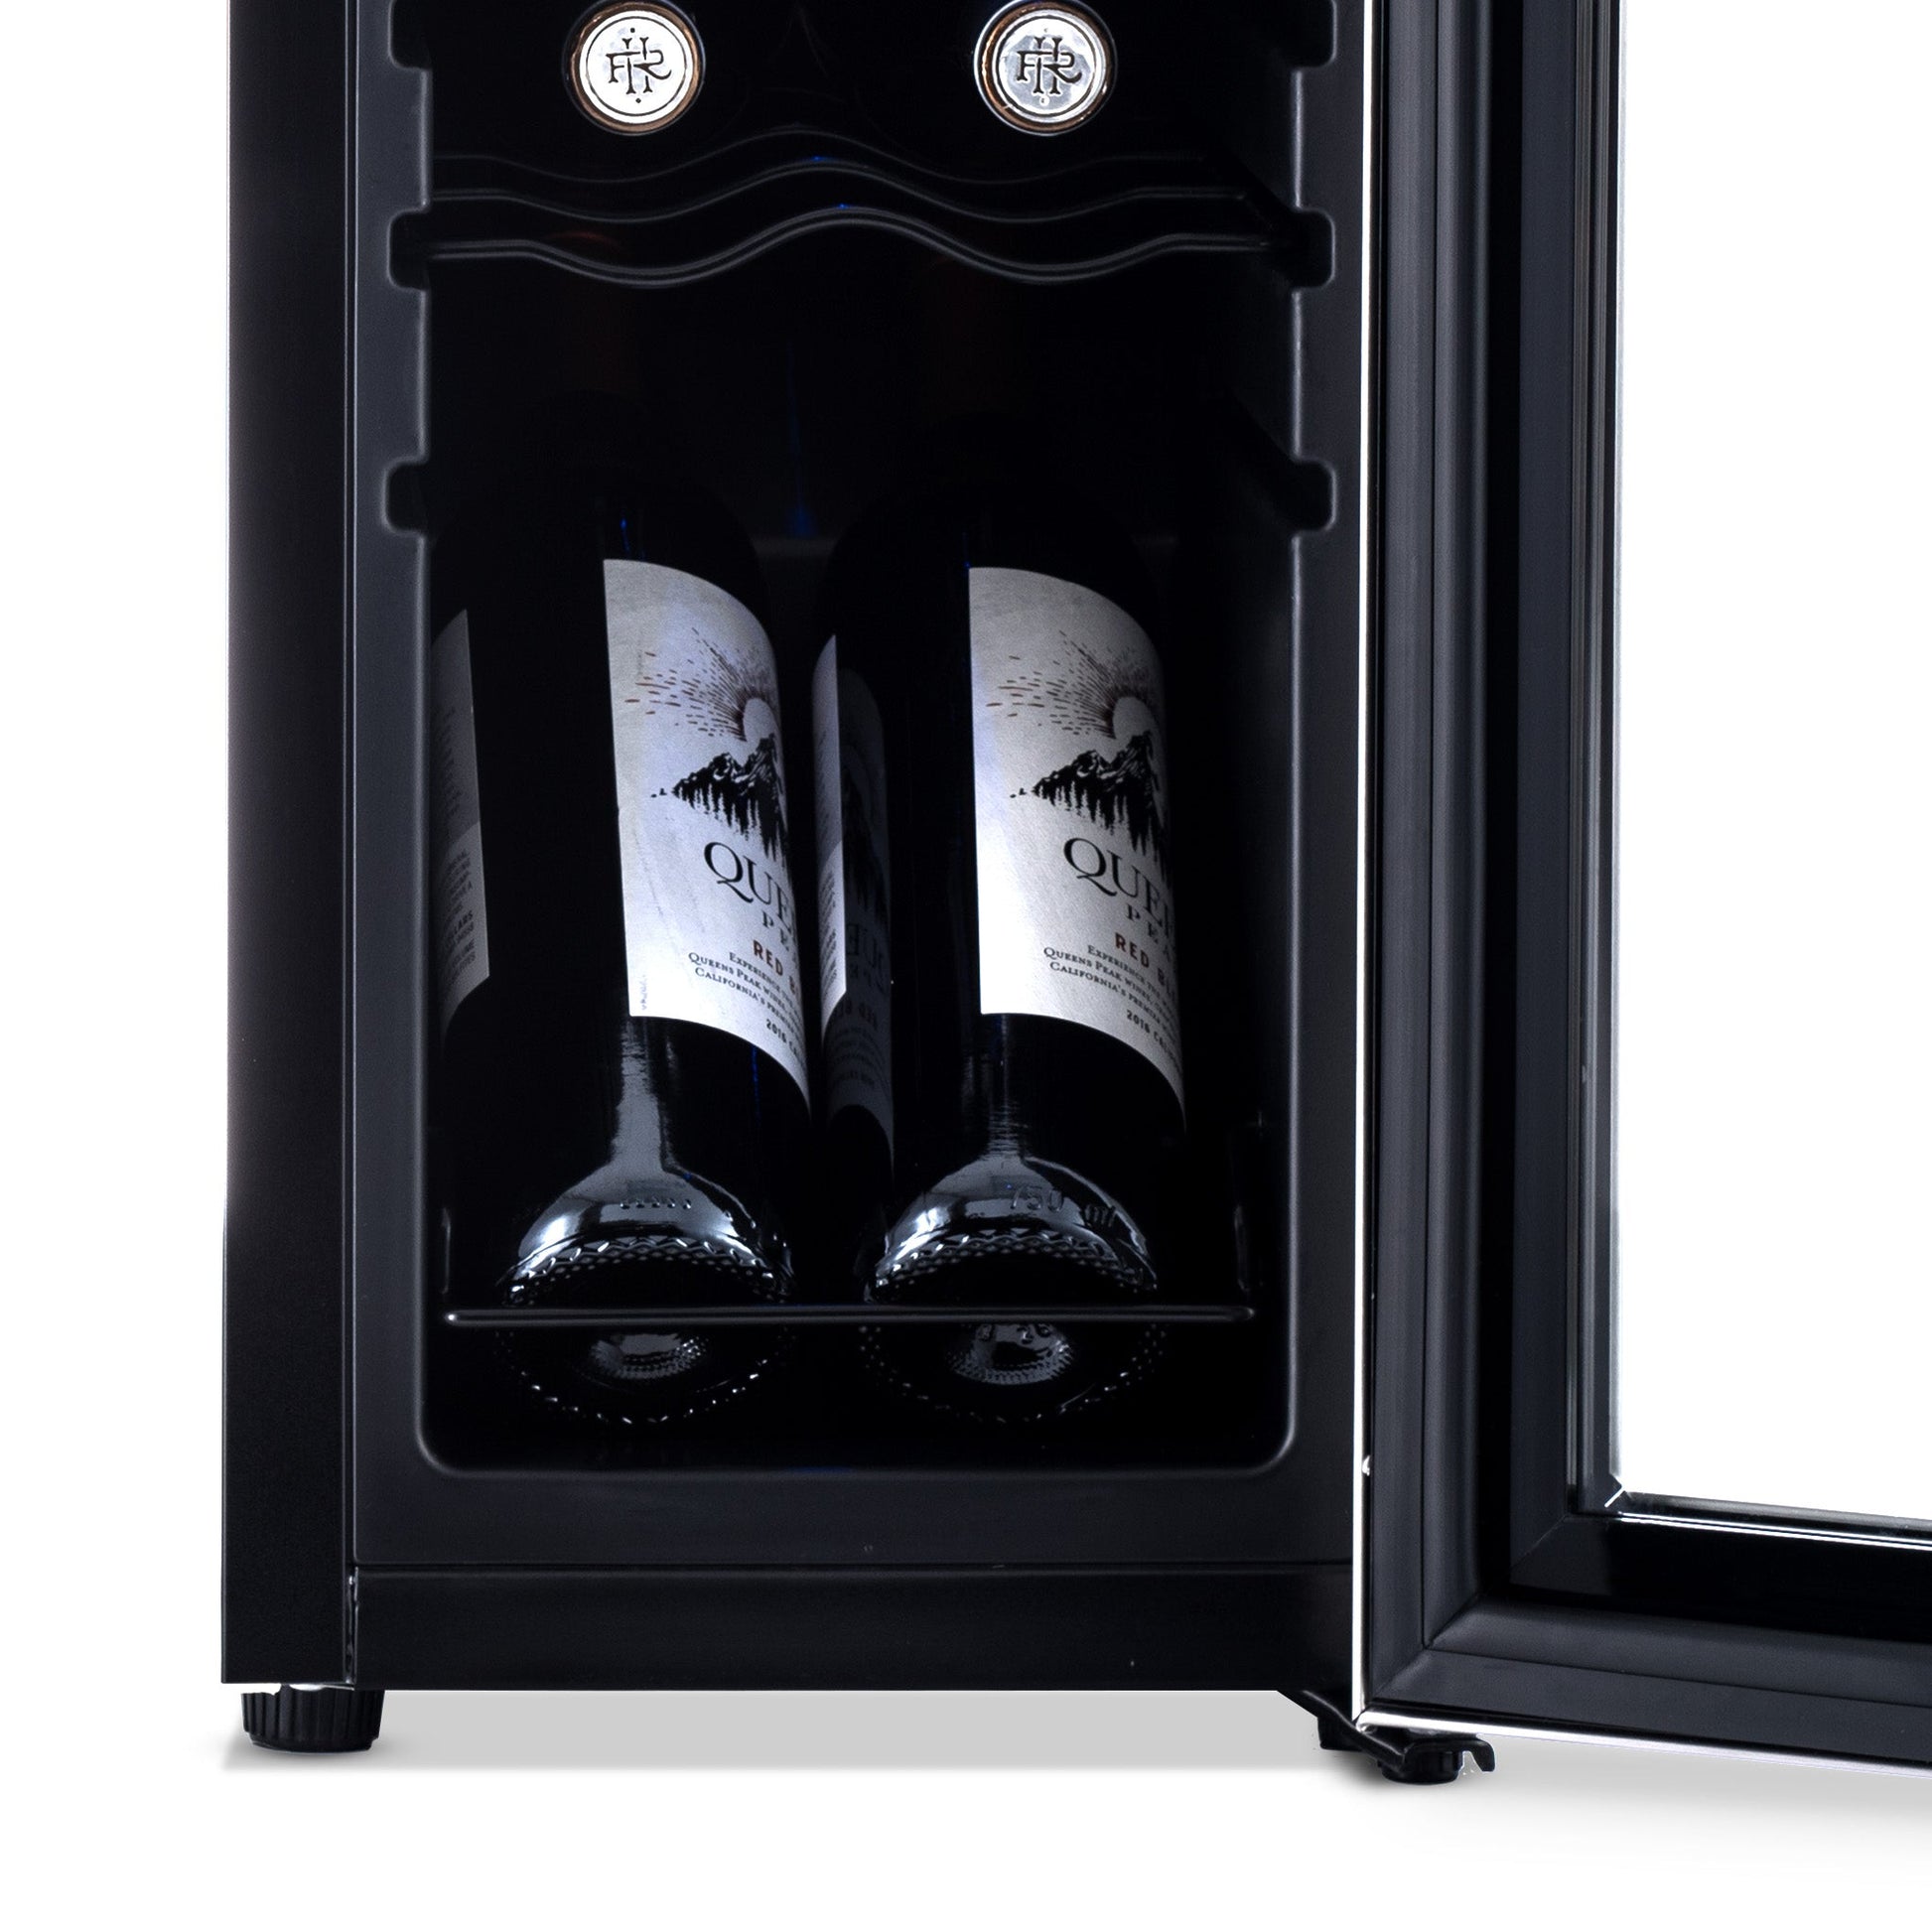 Newair 12 Bottle Wine Cooler Refrigerator, Freestanding Wine Fridge with Stainless Steel & Double-Layer Tempered Glass Door, Quiet Compressor Cooling for Reds, Whites, and Sparkling Wine, 41F-64F Digital Temperature Control, Removable & Adjustable Racks